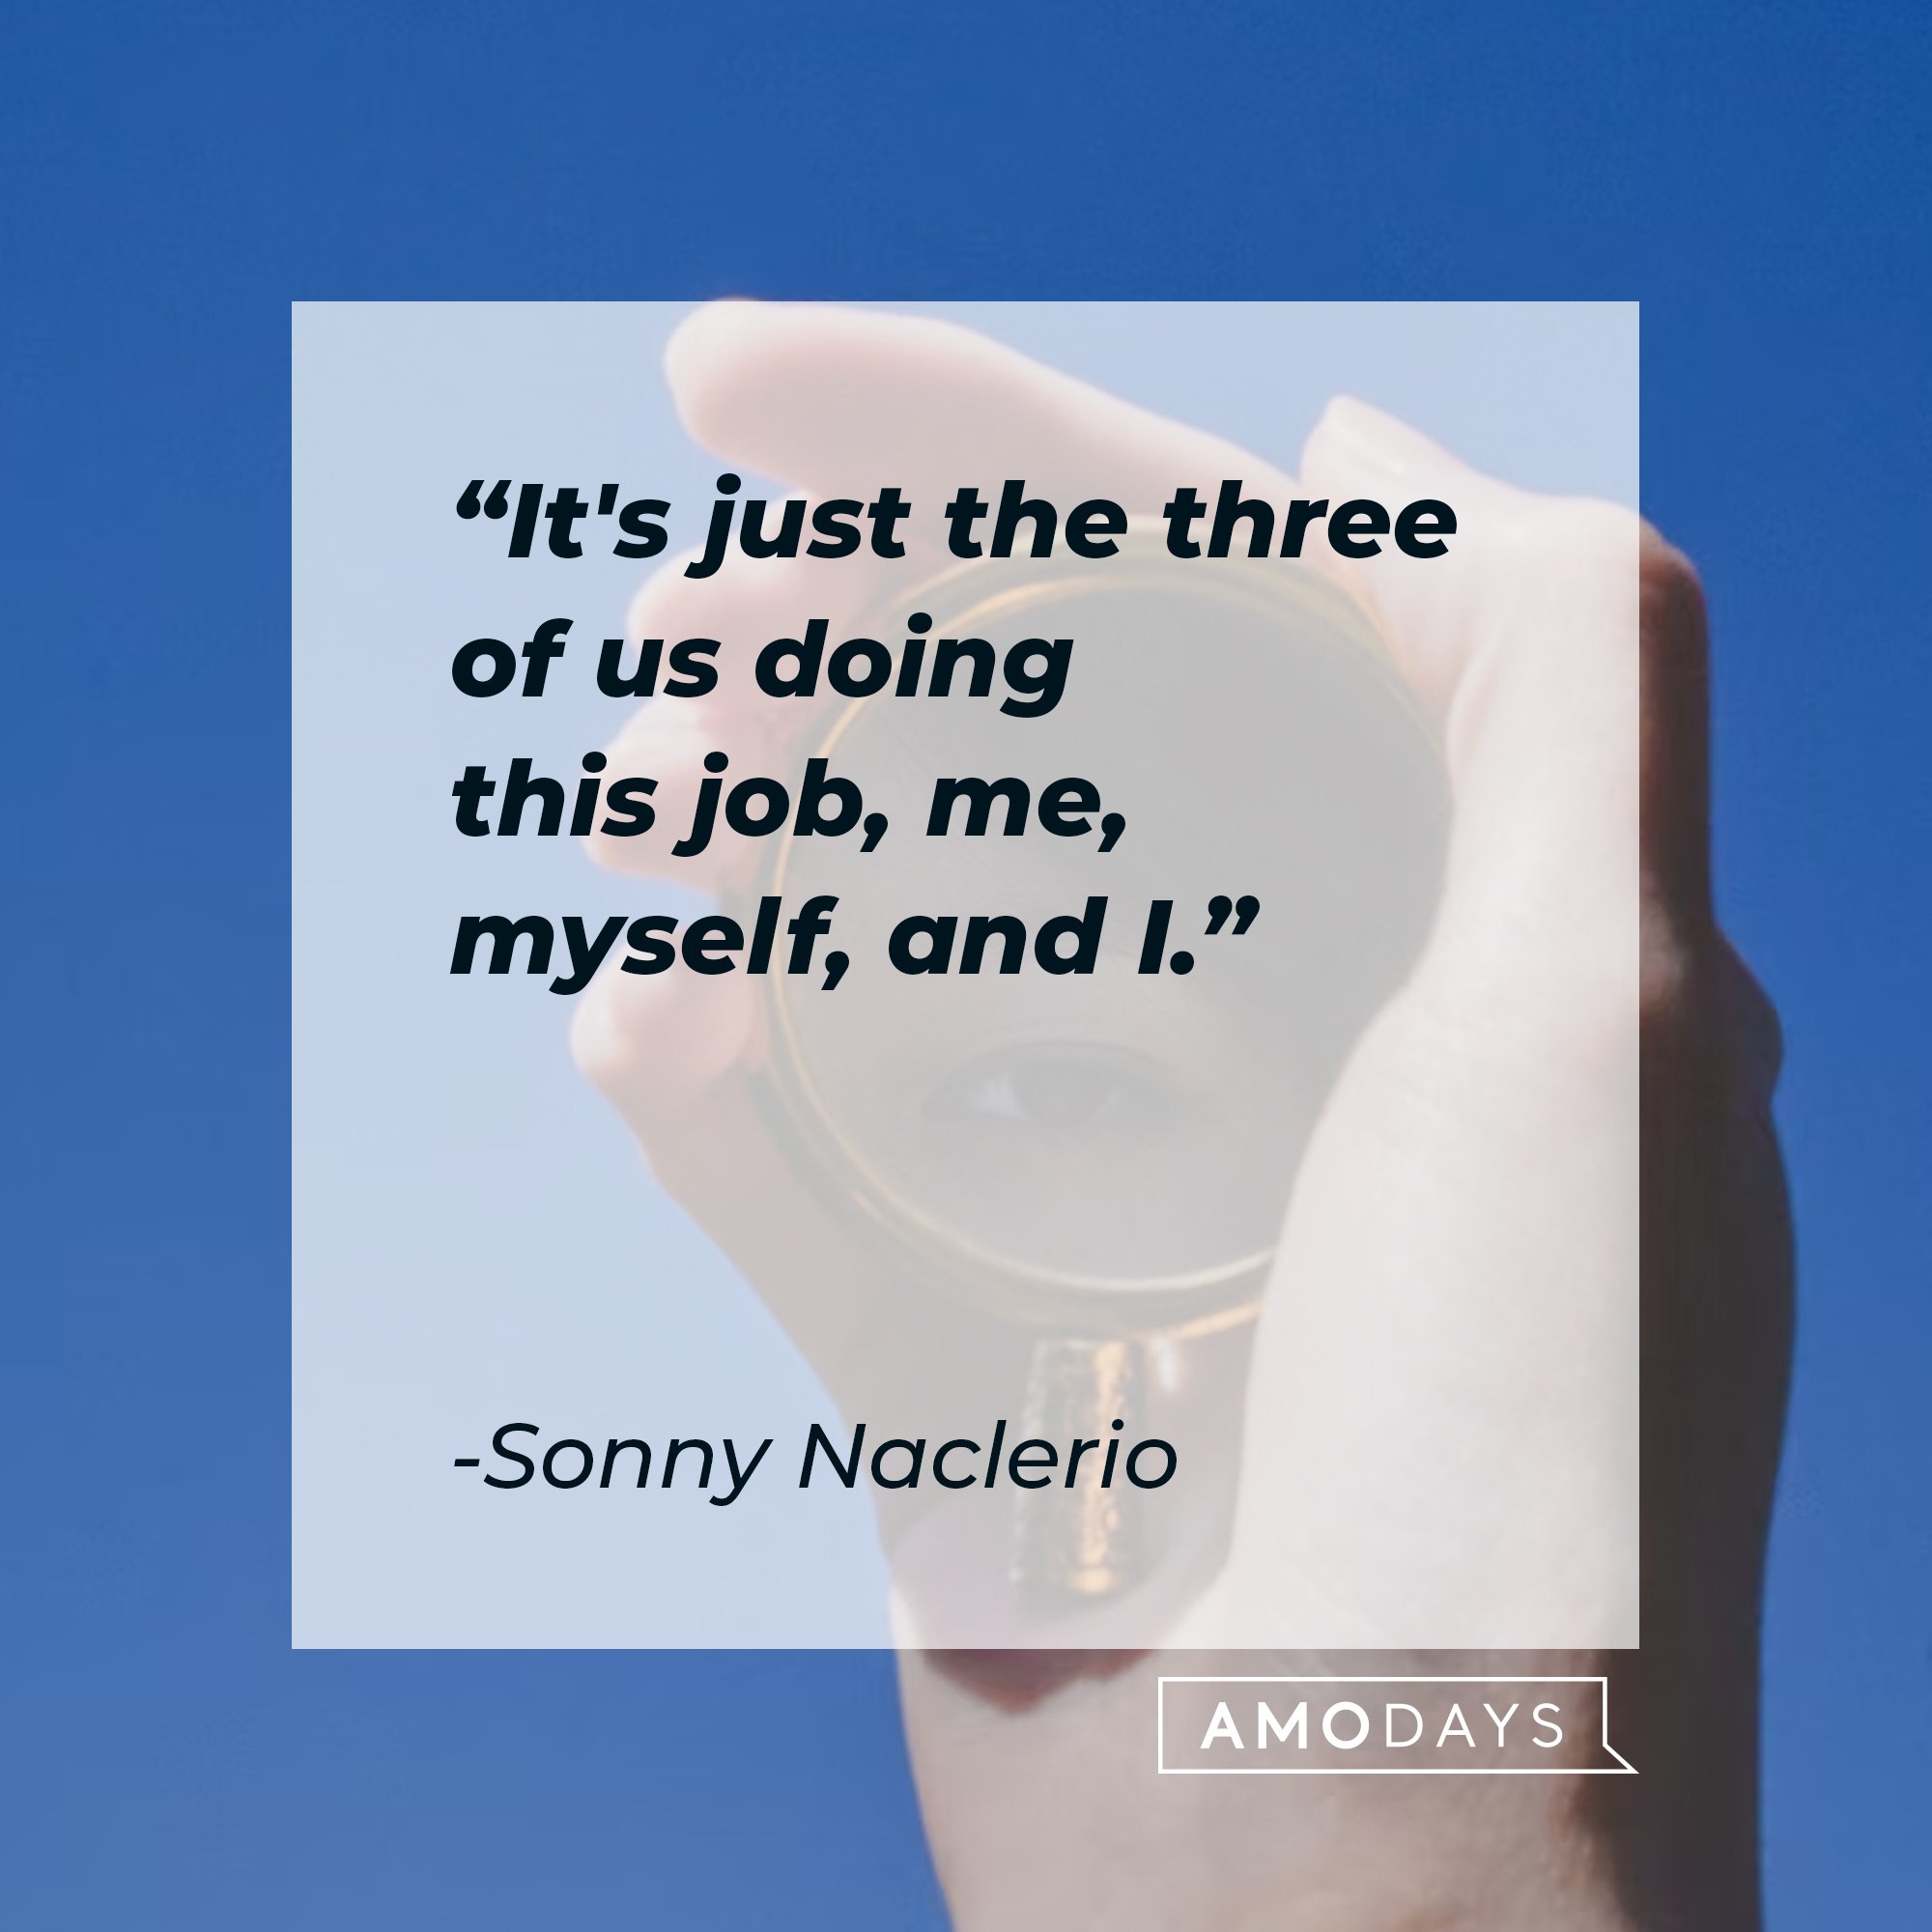 Sonny Naclerio’s quote: "It's just the three of us doing this job, me, myself, and I." | Image: AmoDays